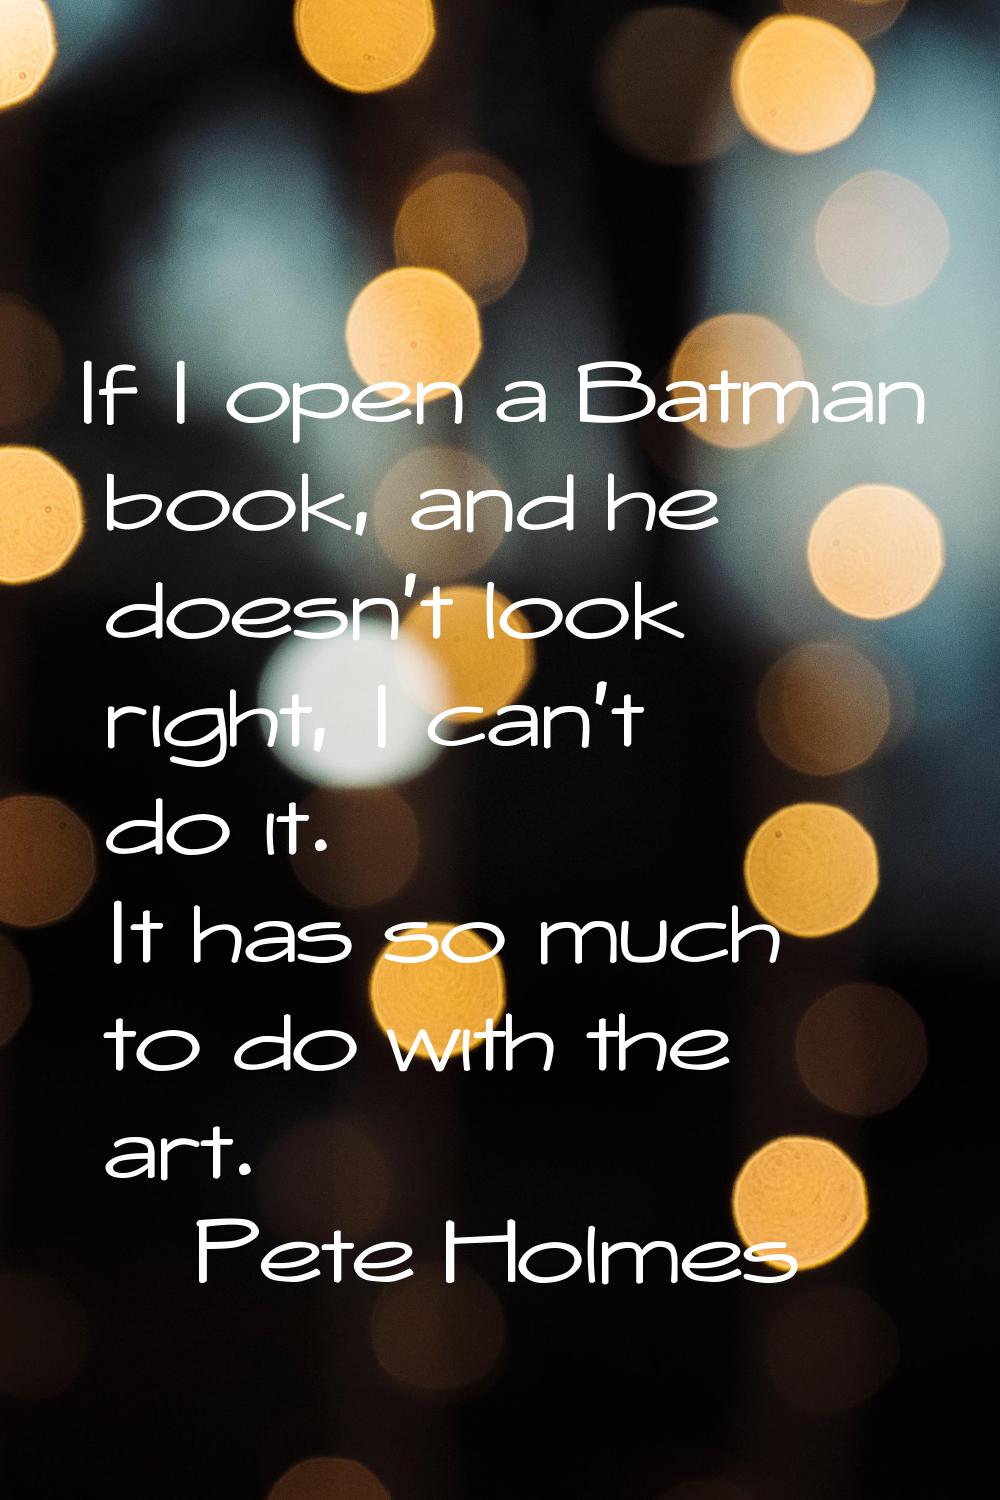 If I open a Batman book, and he doesn't look right, I can't do it. It has so much to do with the ar